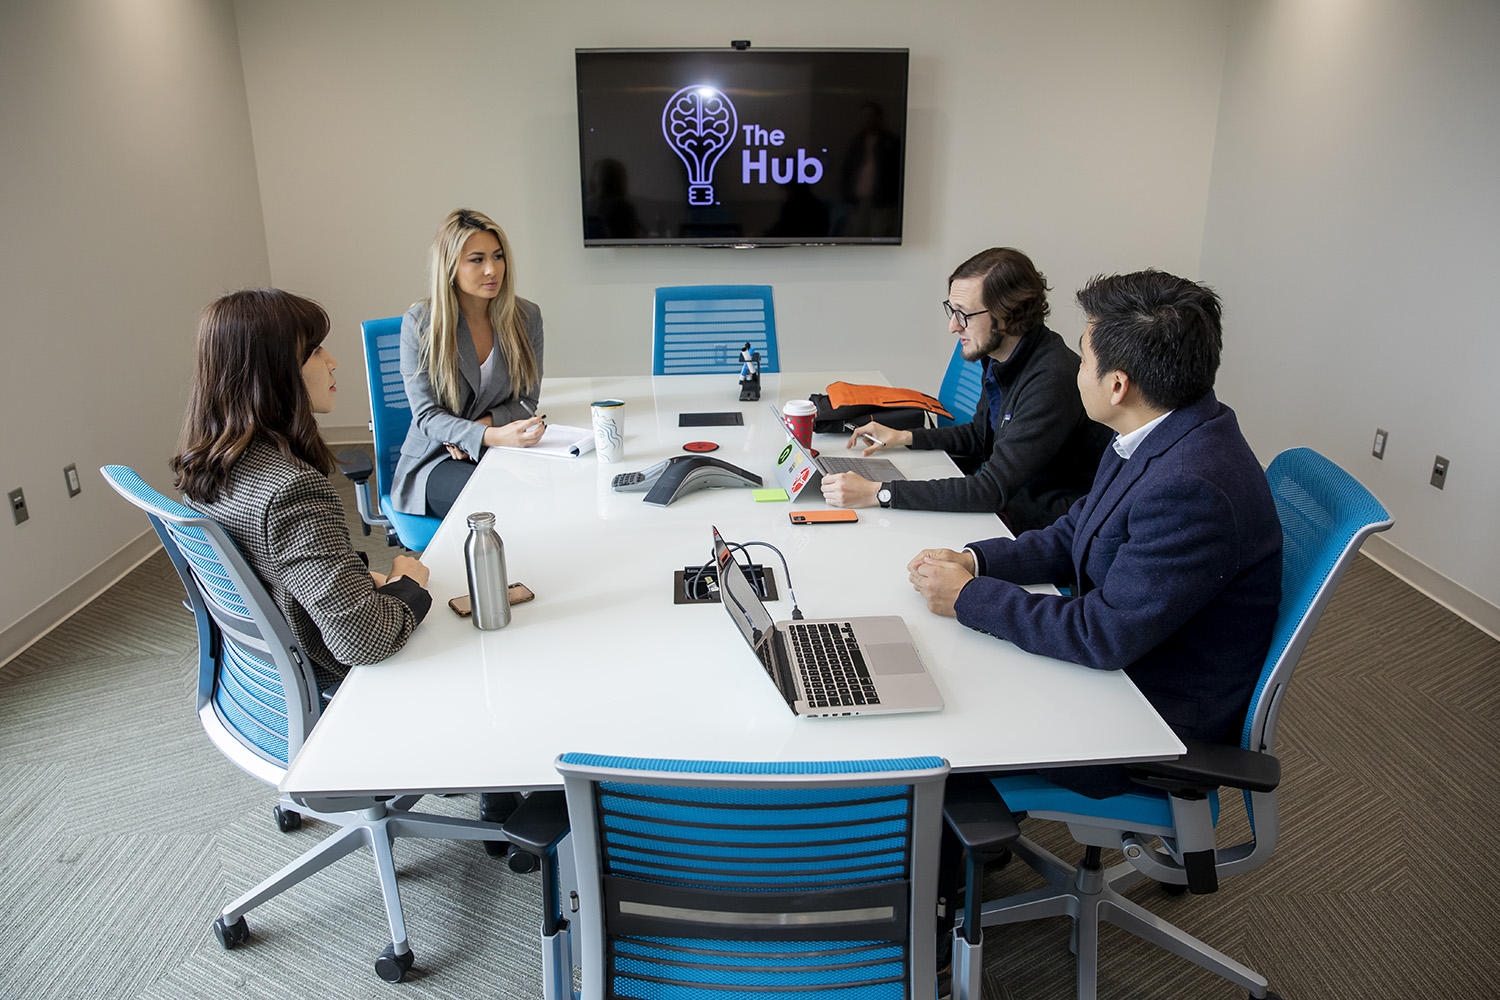 The Smart Mirror team meets at the Innovation Hub